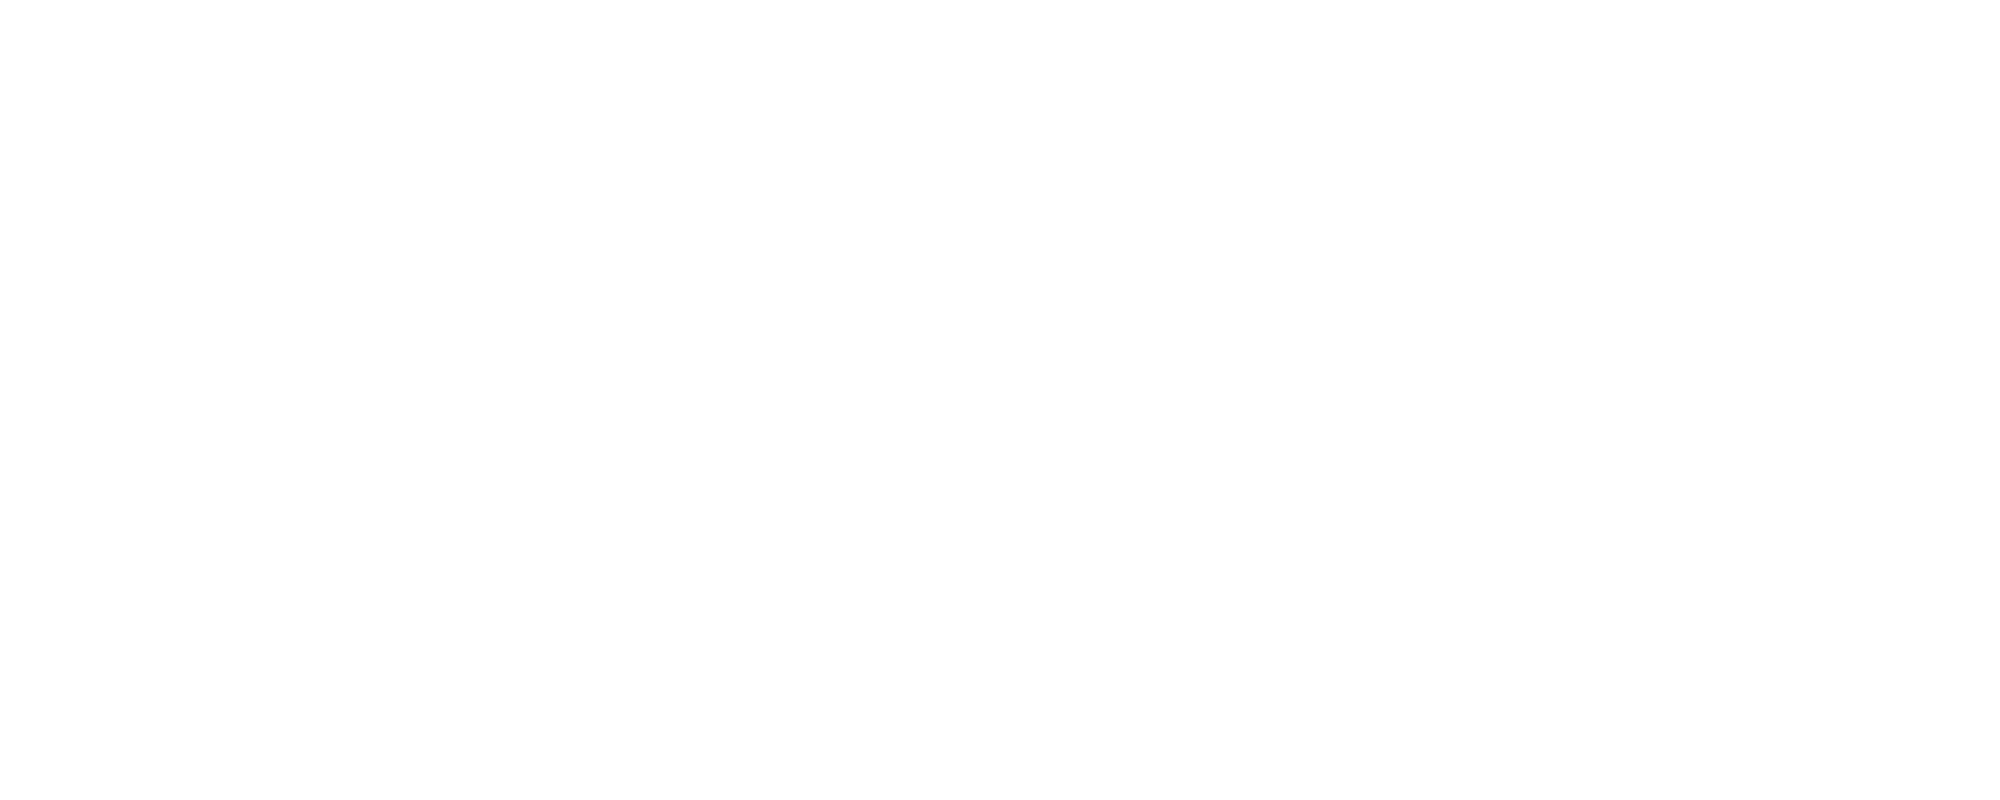 OVATION TV PARTNERS WITH CHARTER COMMUNICATIONS FOR SIXTH CONSECUTIVE YEAR OF STAND FOR THE ARTS AWARDS